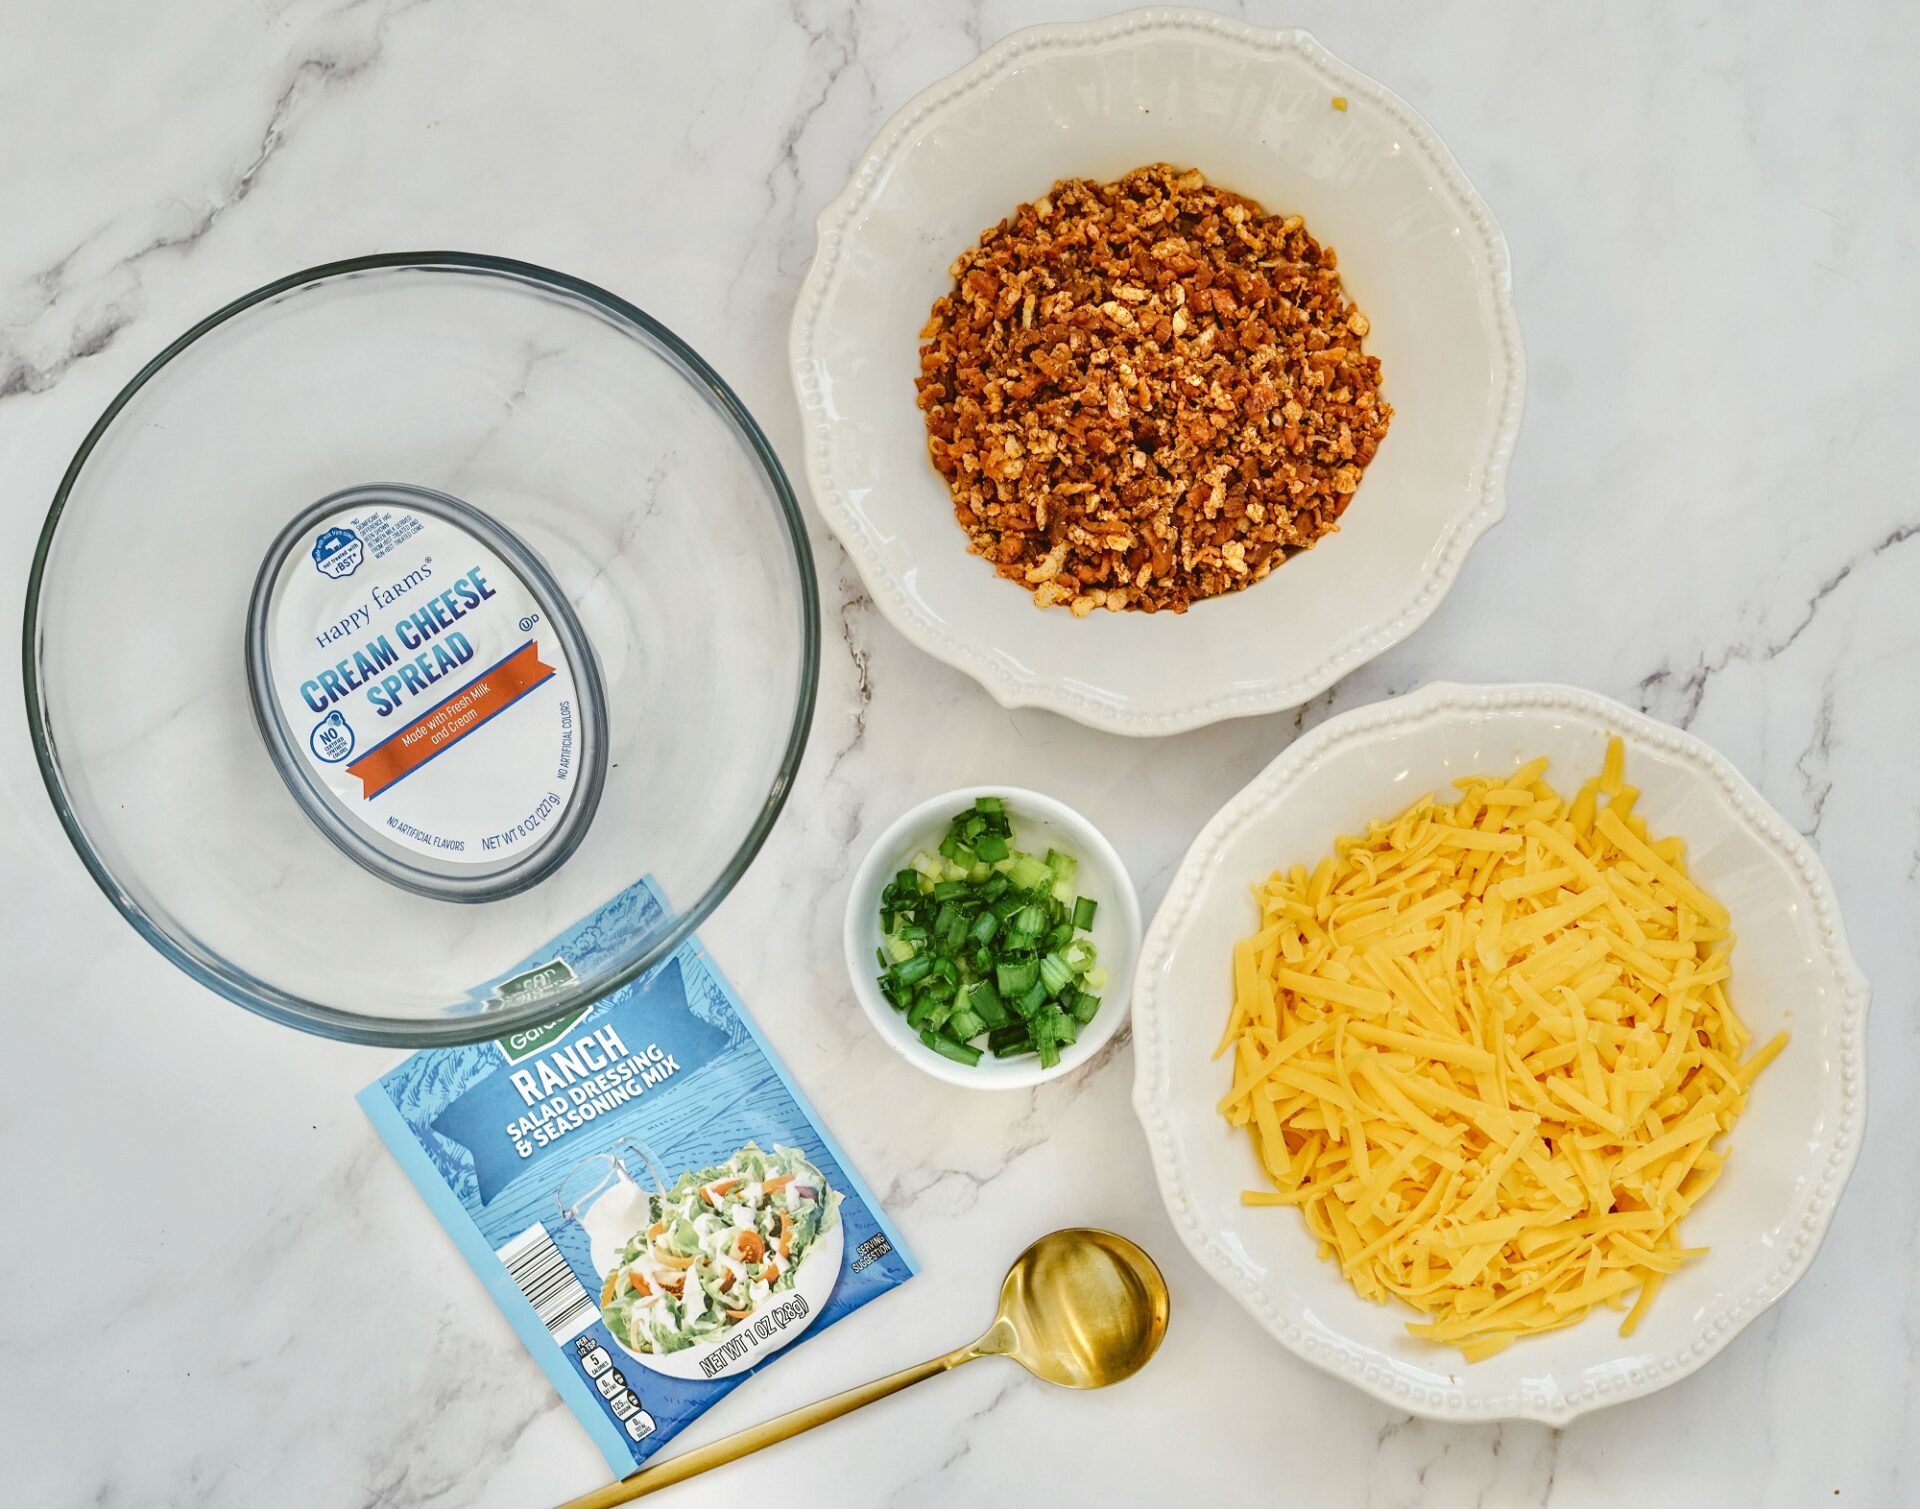 Bacon ranch cheese ball ingredients.